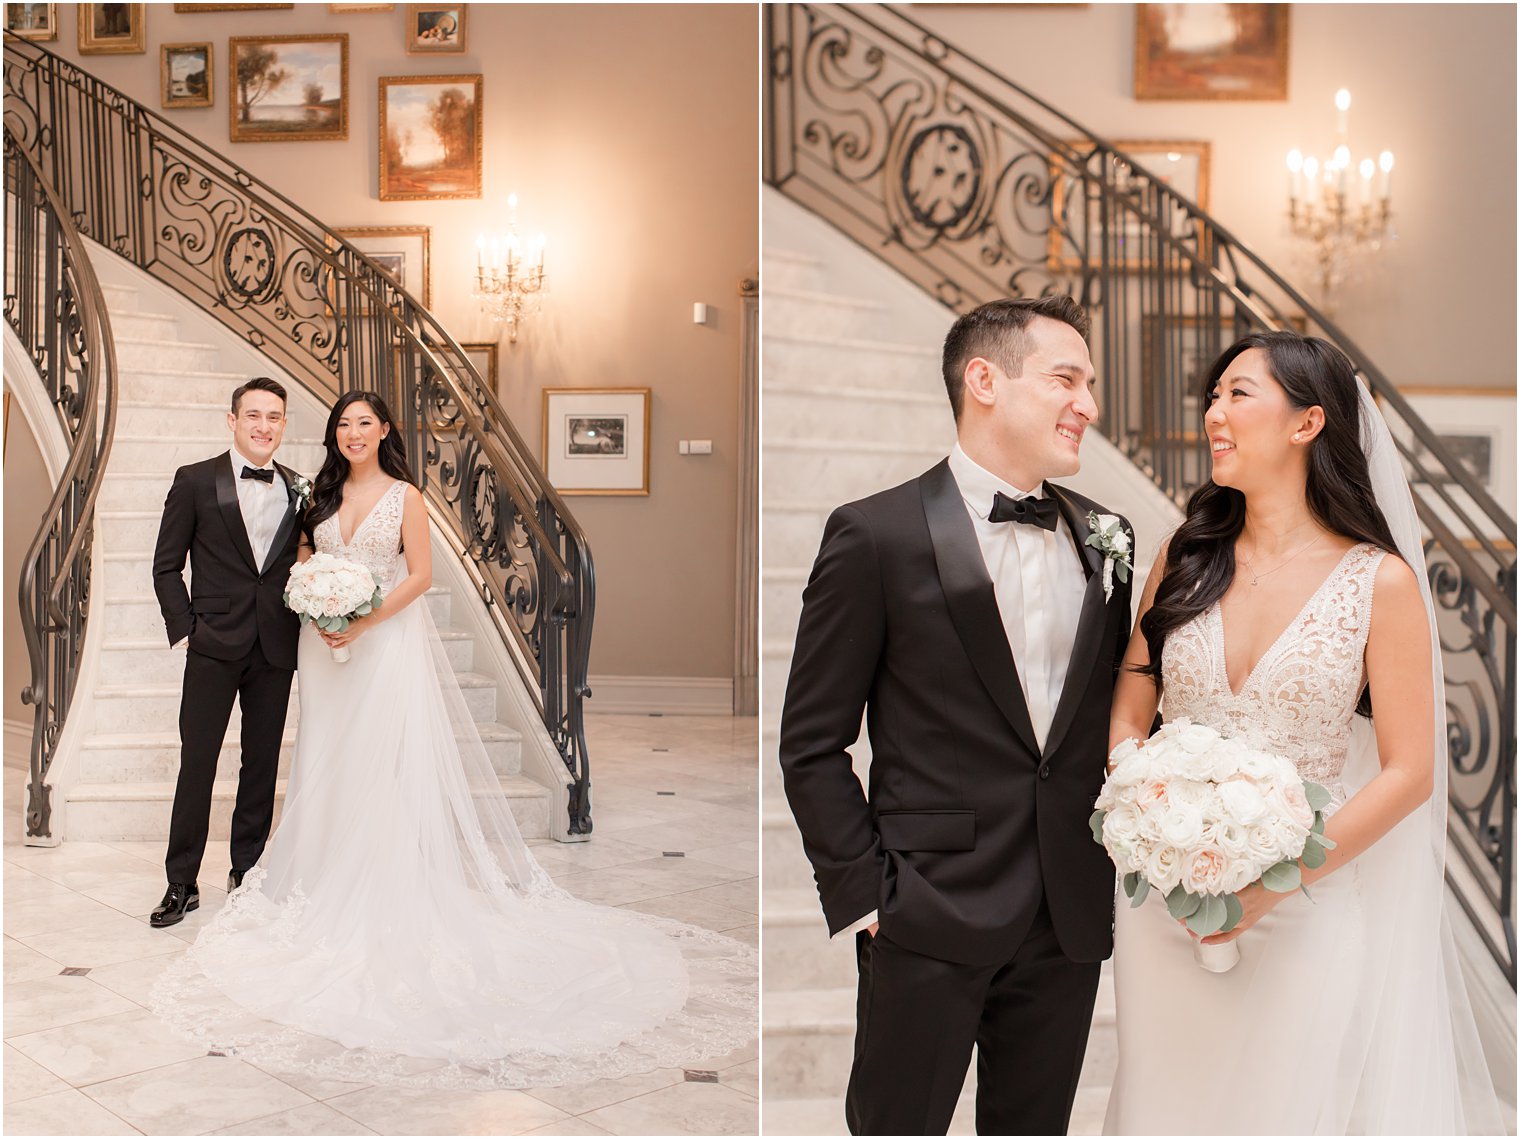 Formal bride and groom portraits by staircase on wedding day at Park Chateau Estate